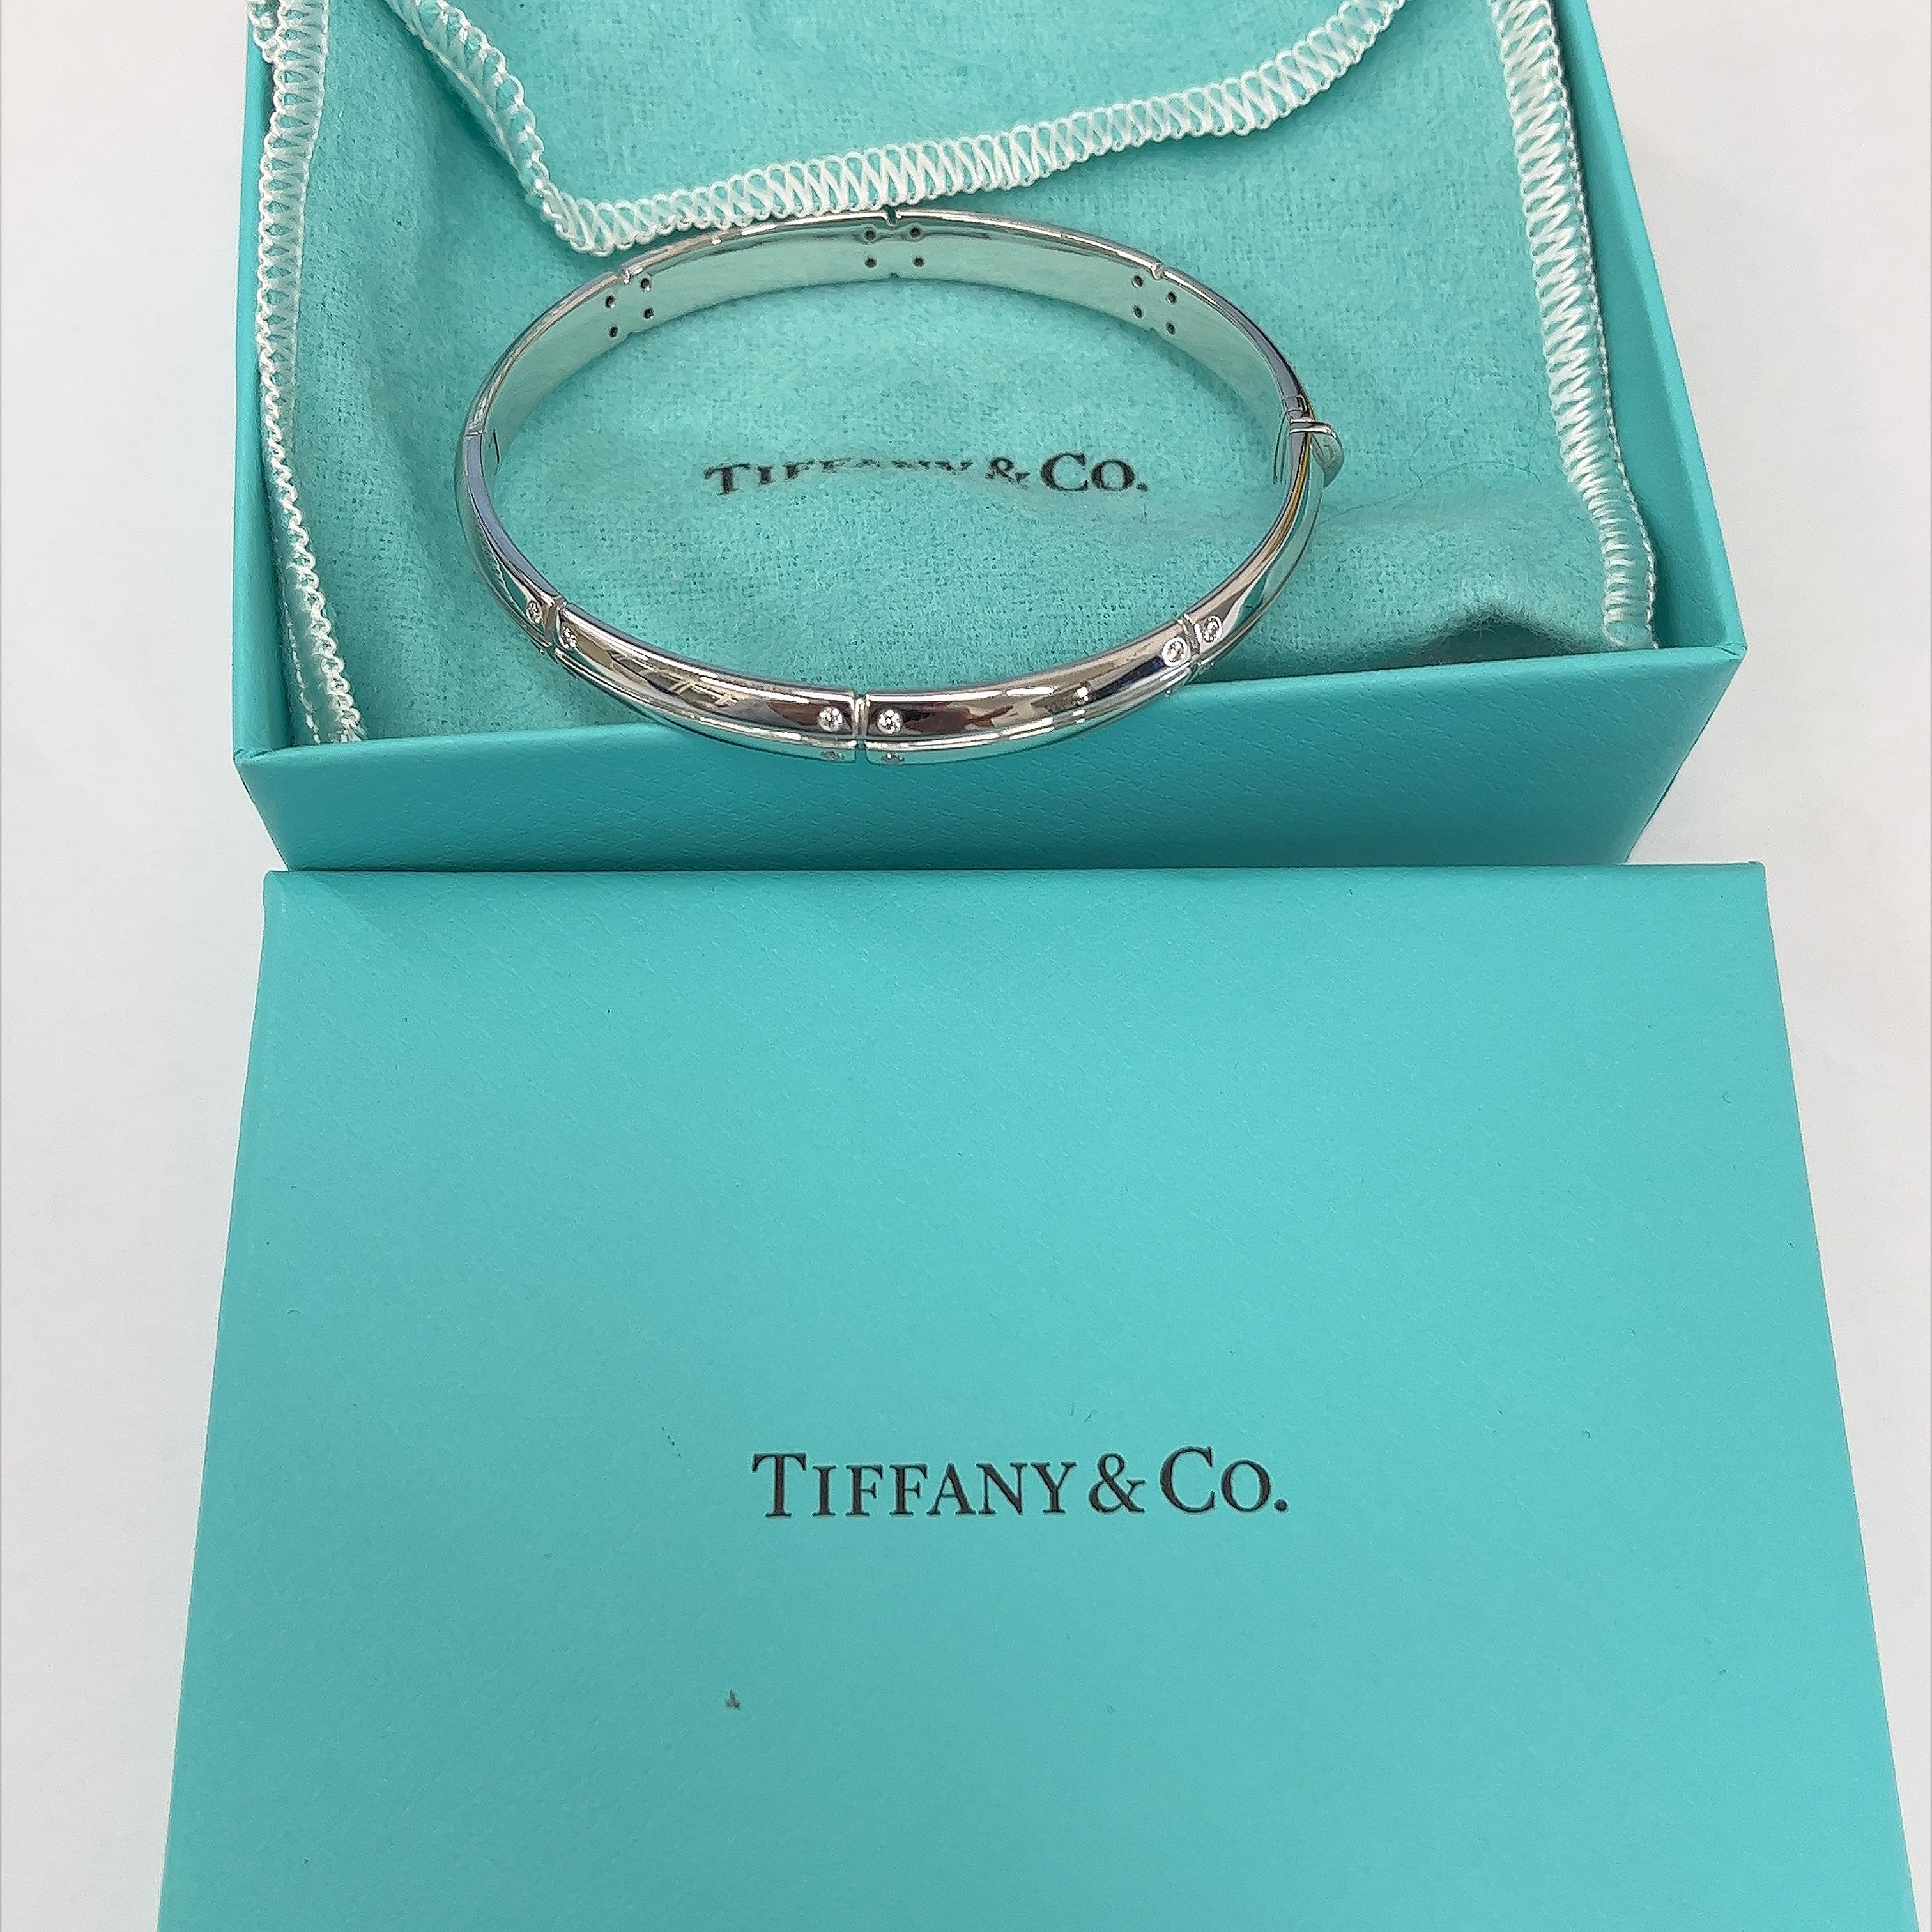 
Elevate your style with this luxurious Tiffany & Co Diamond Streamerica Bangle Bracelet 
Set In 18ct White Gold with 0.36ct Brilliant cut Natural Diamonds.
Its understated elegance is enhanced by delicate diamonds detailing, offering an ideal